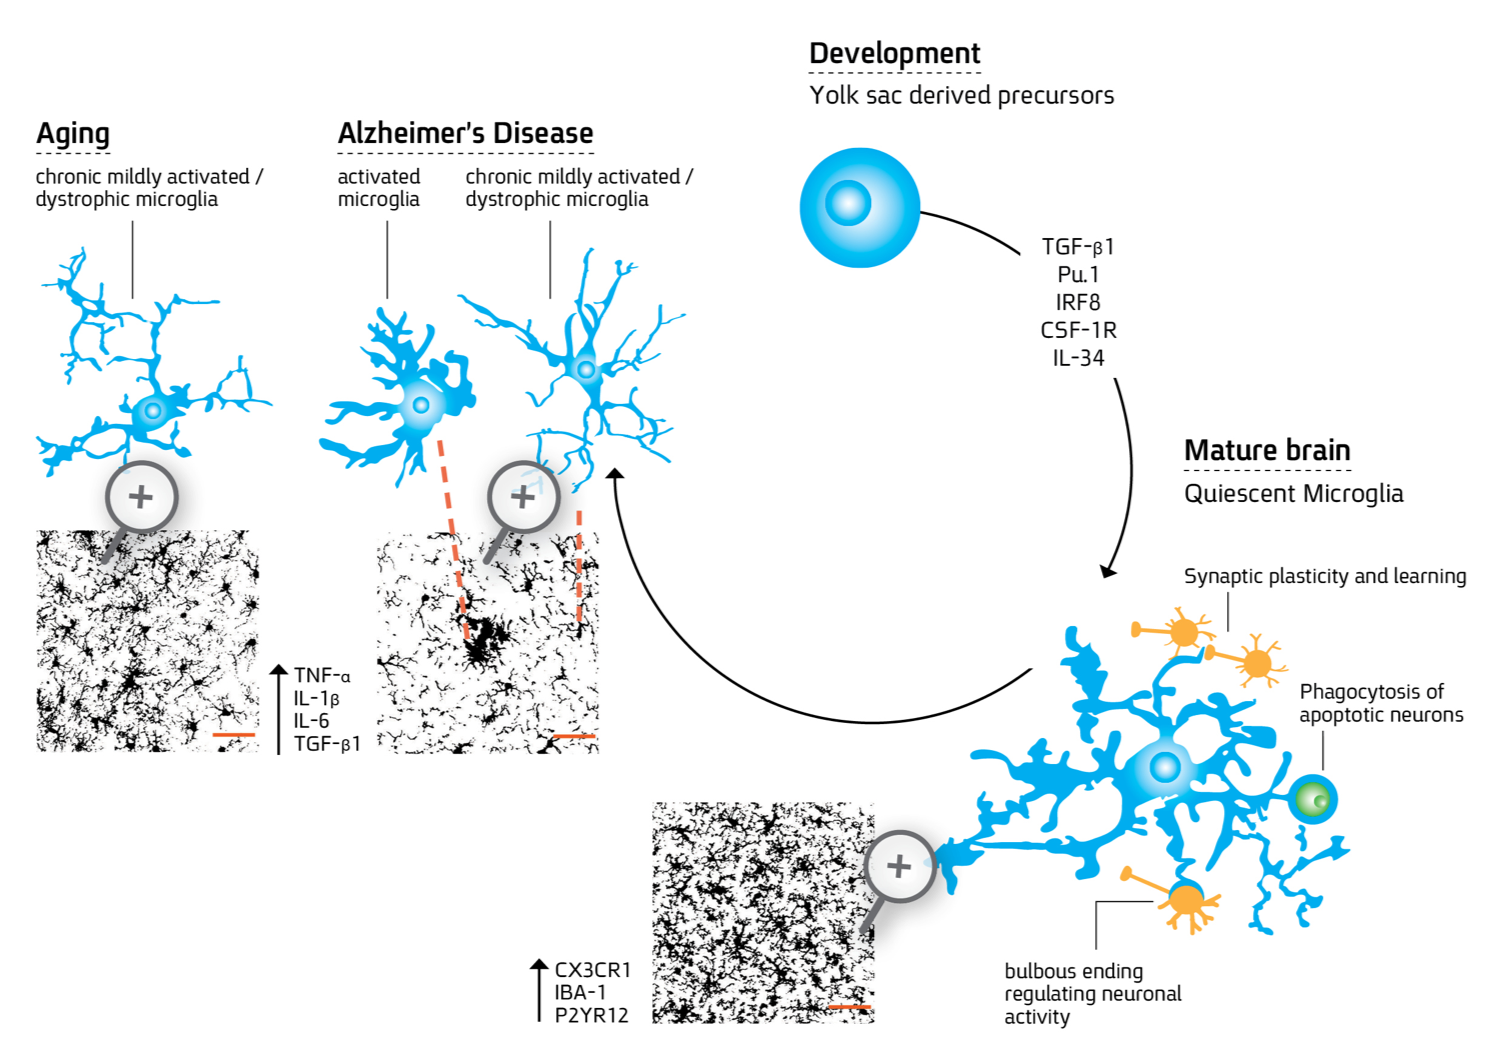 Immune cell residence and function within the central nervous system